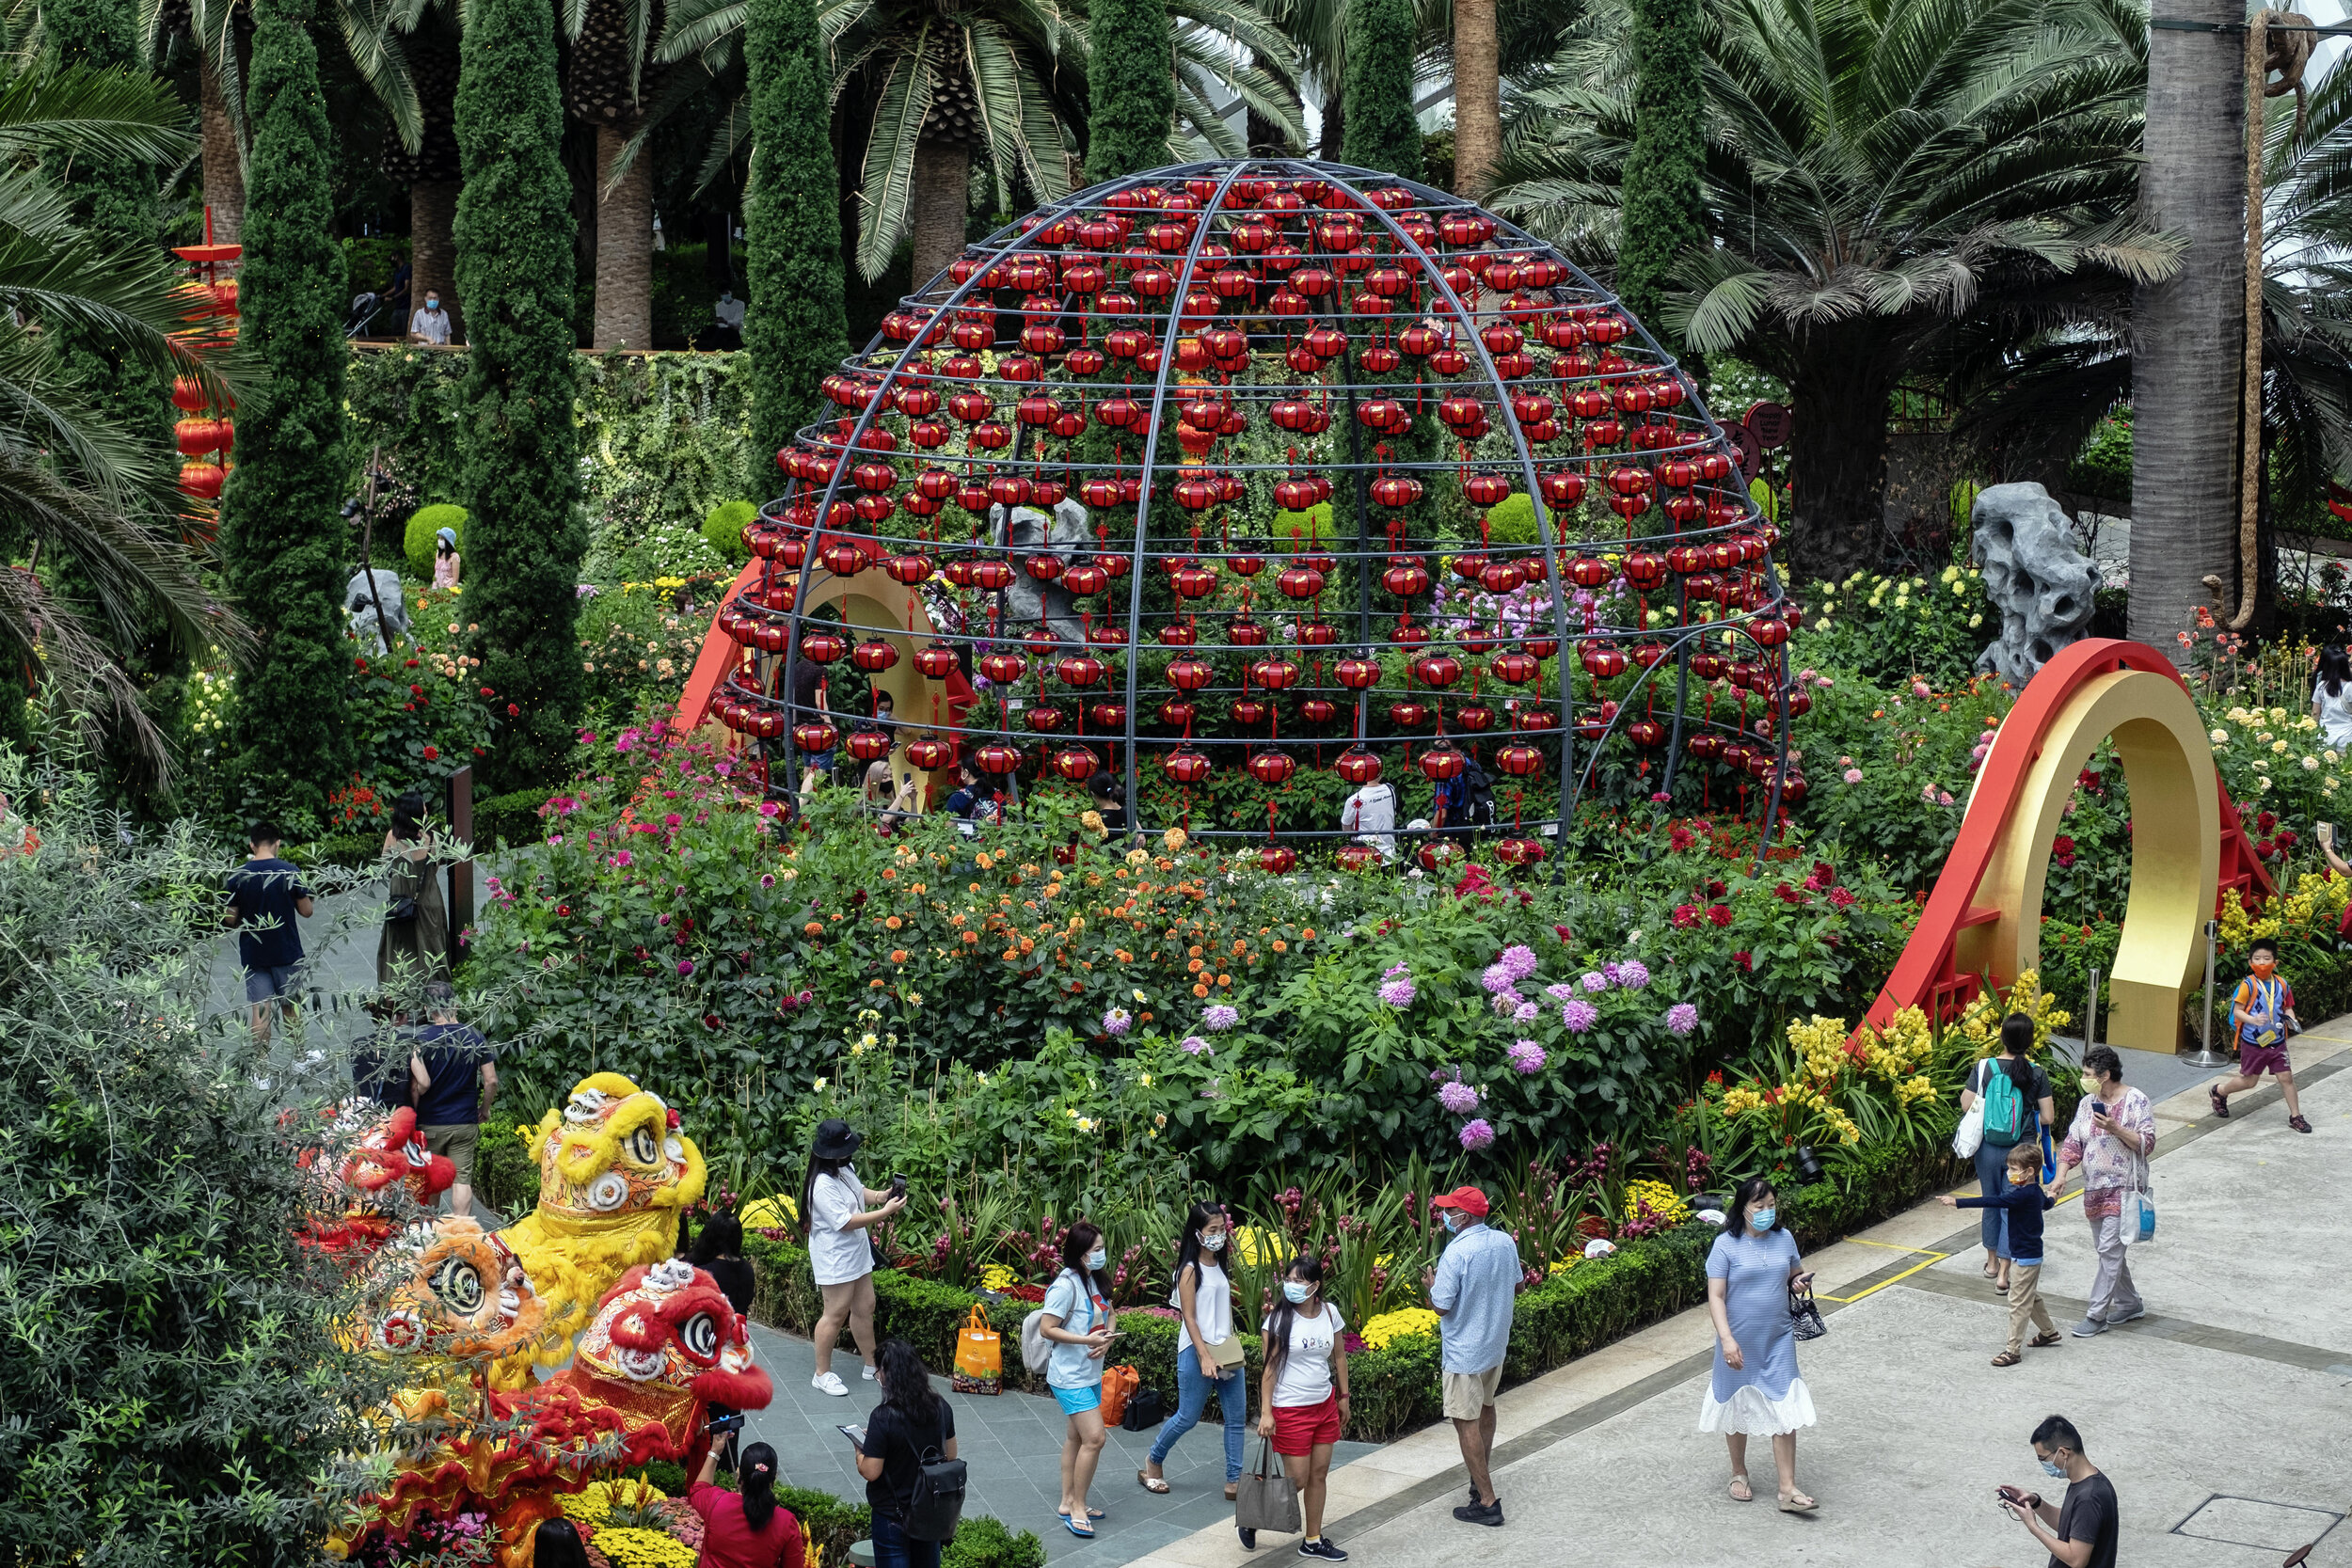  A general view of the annual Dahlia Dreams floral display ahead of the Chinese Lunar New Year of the Ox, otherwise known as the Spring Festival, at Singapore's Gardens by the Bay, January 31, 2021. REUTERS/Loriene Perera 